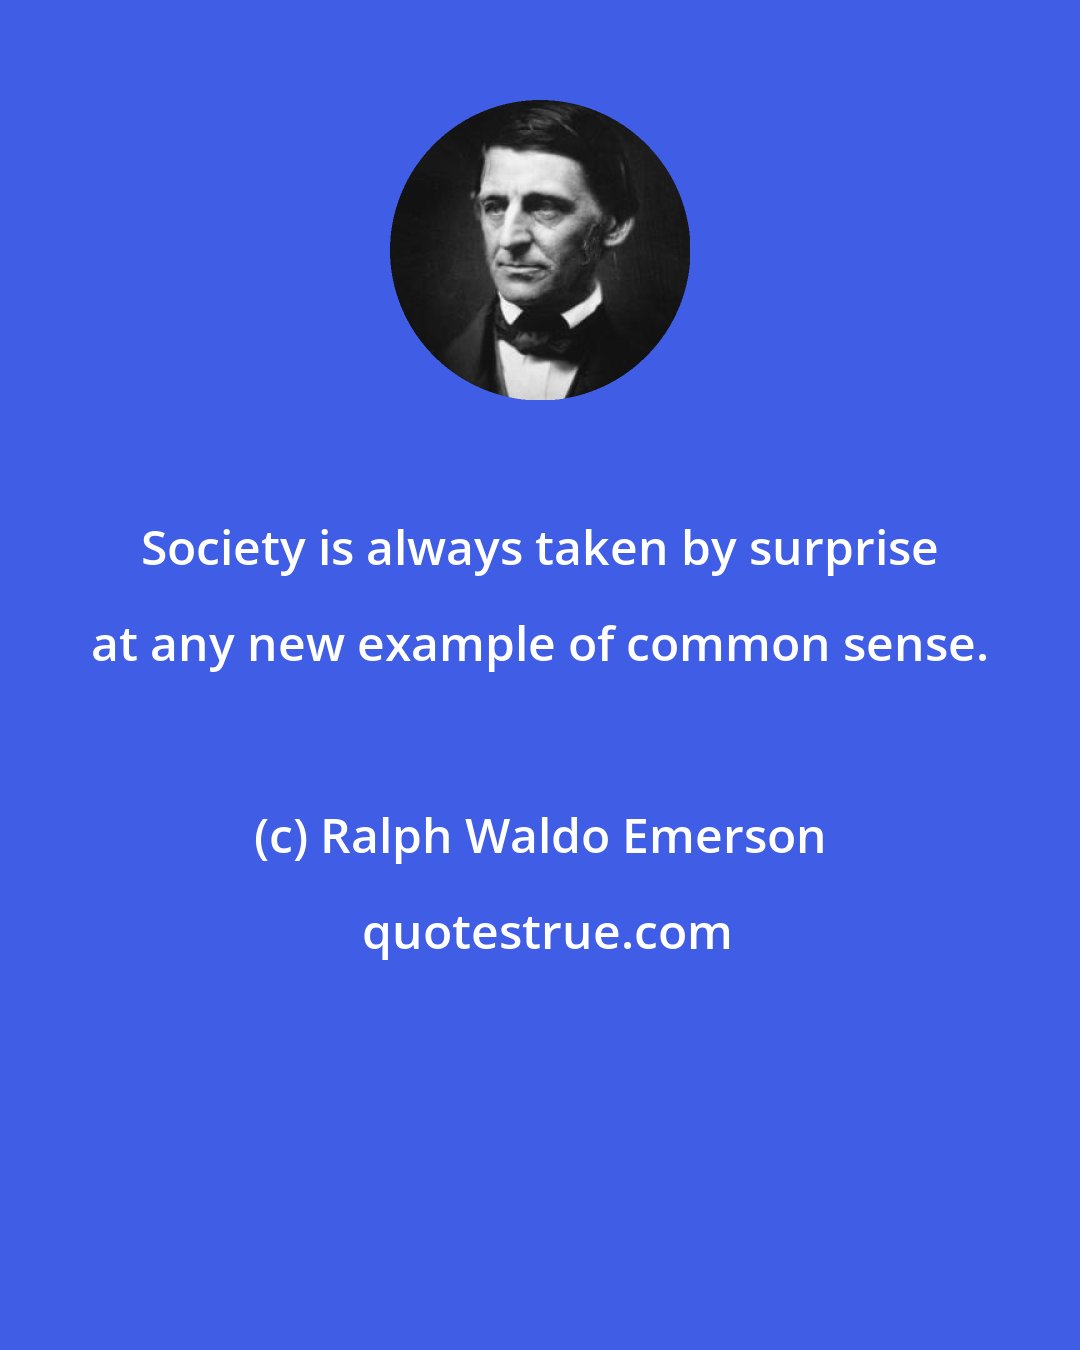 Ralph Waldo Emerson: Society is always taken by surprise at any new example of common sense.